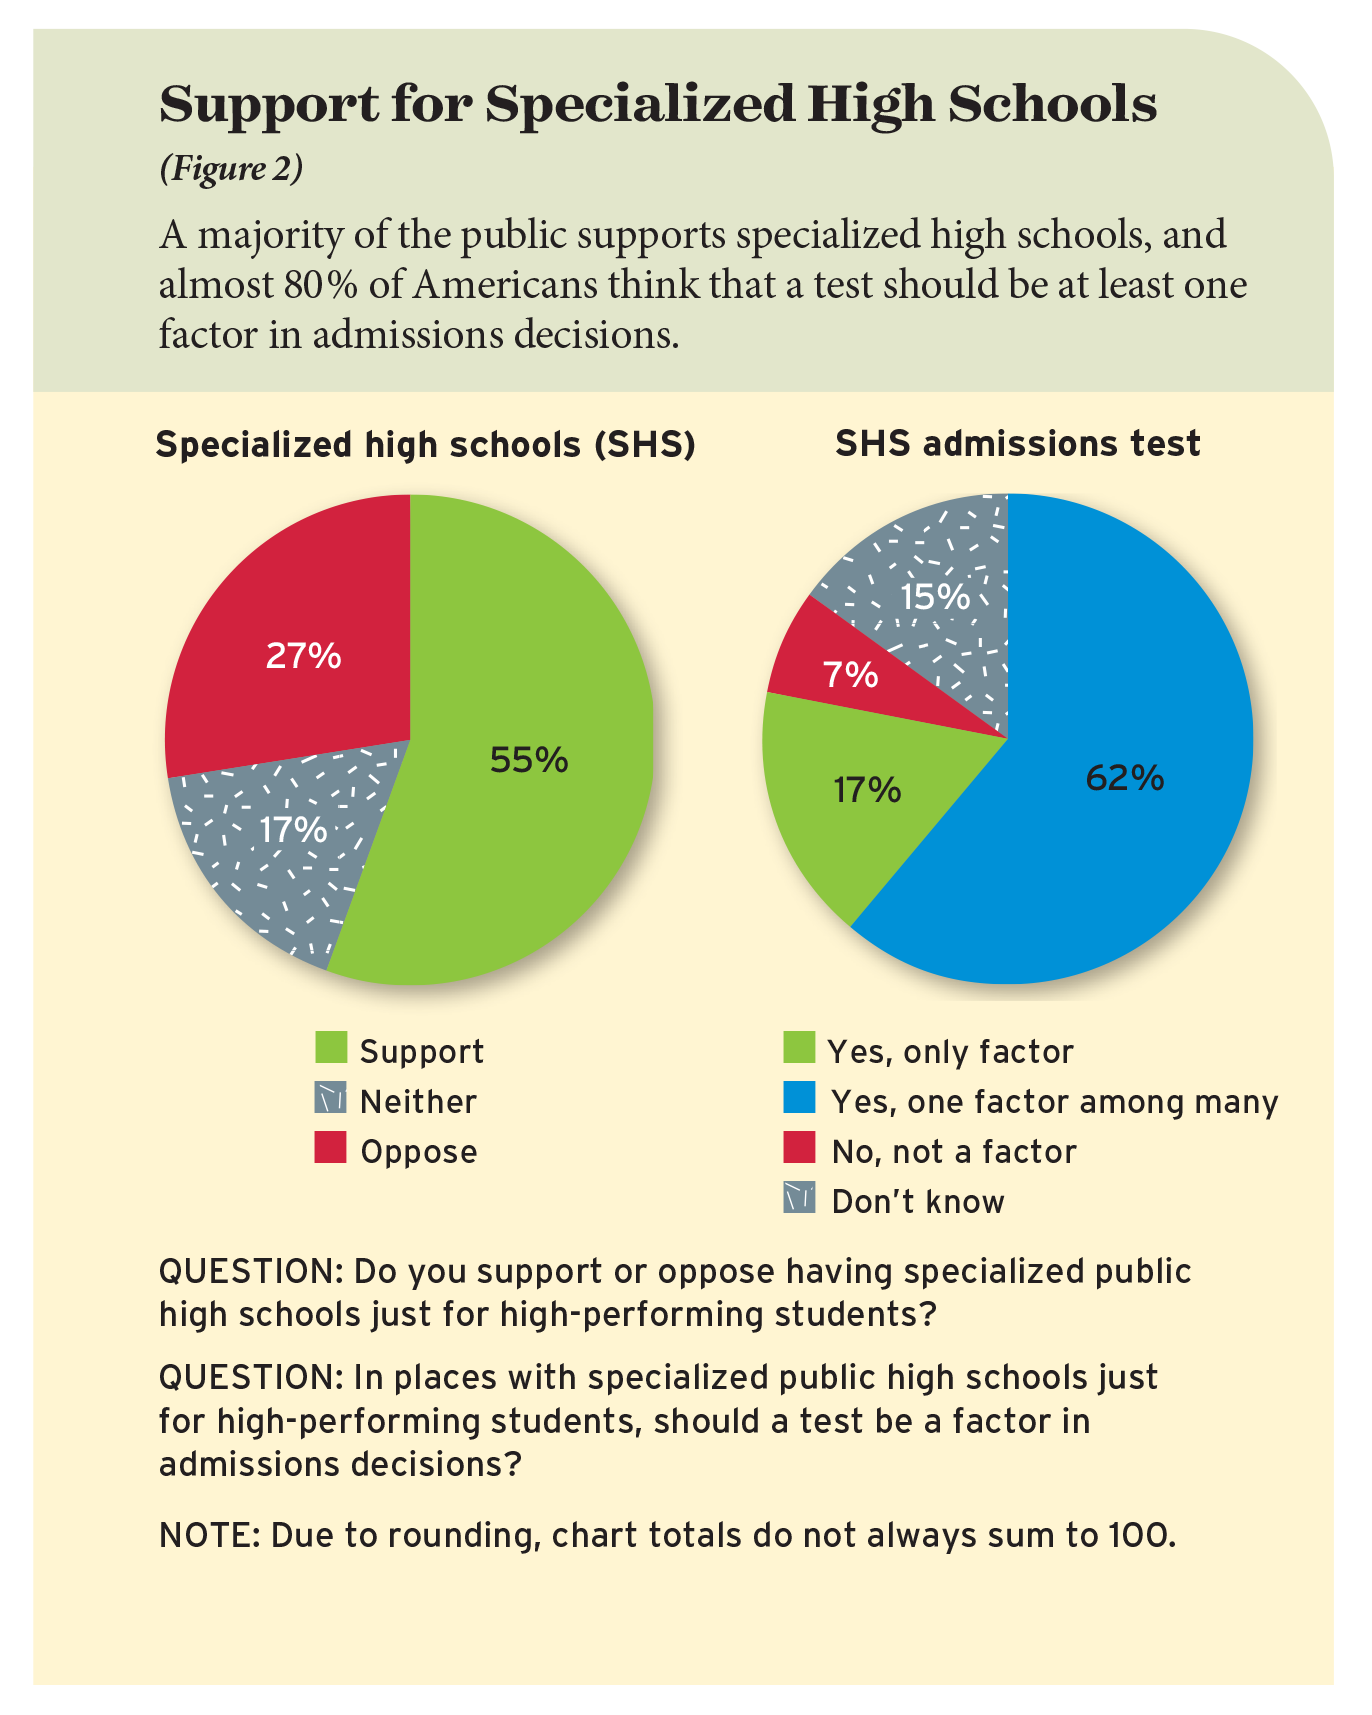 Support for Specialized High Schools (Figure 2)